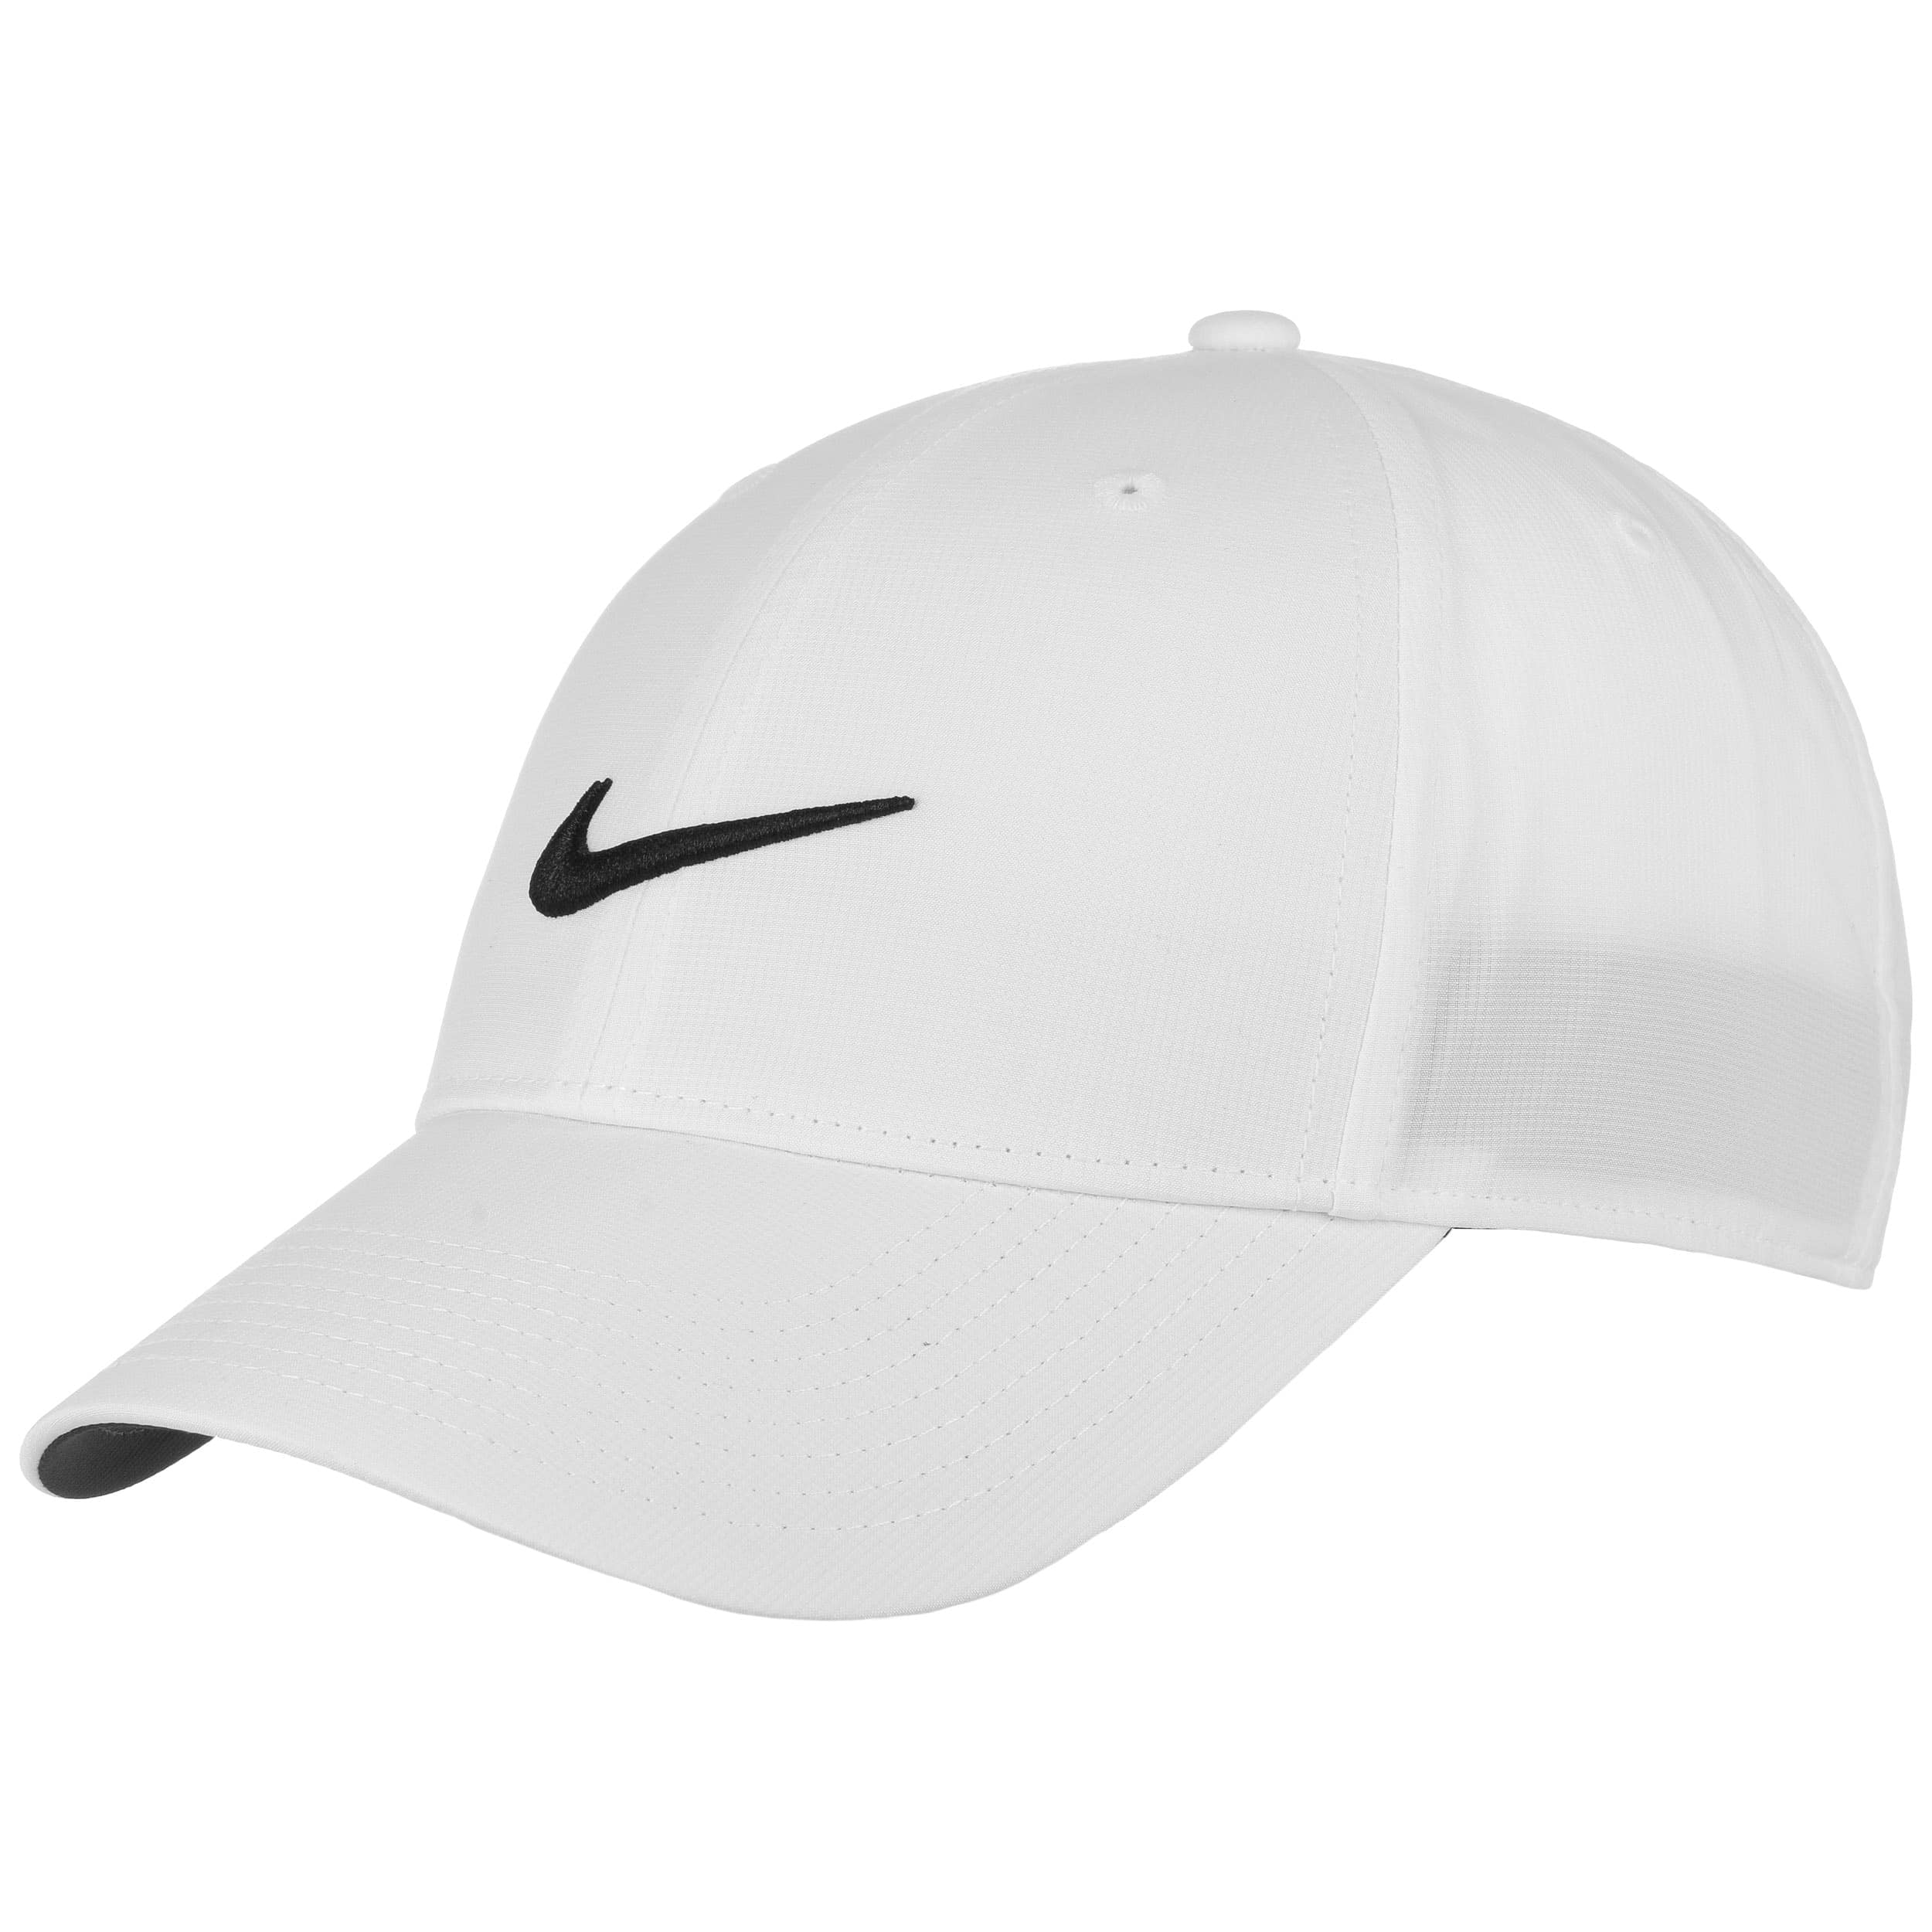 New Legacy 91 Cap By Nike 26 95